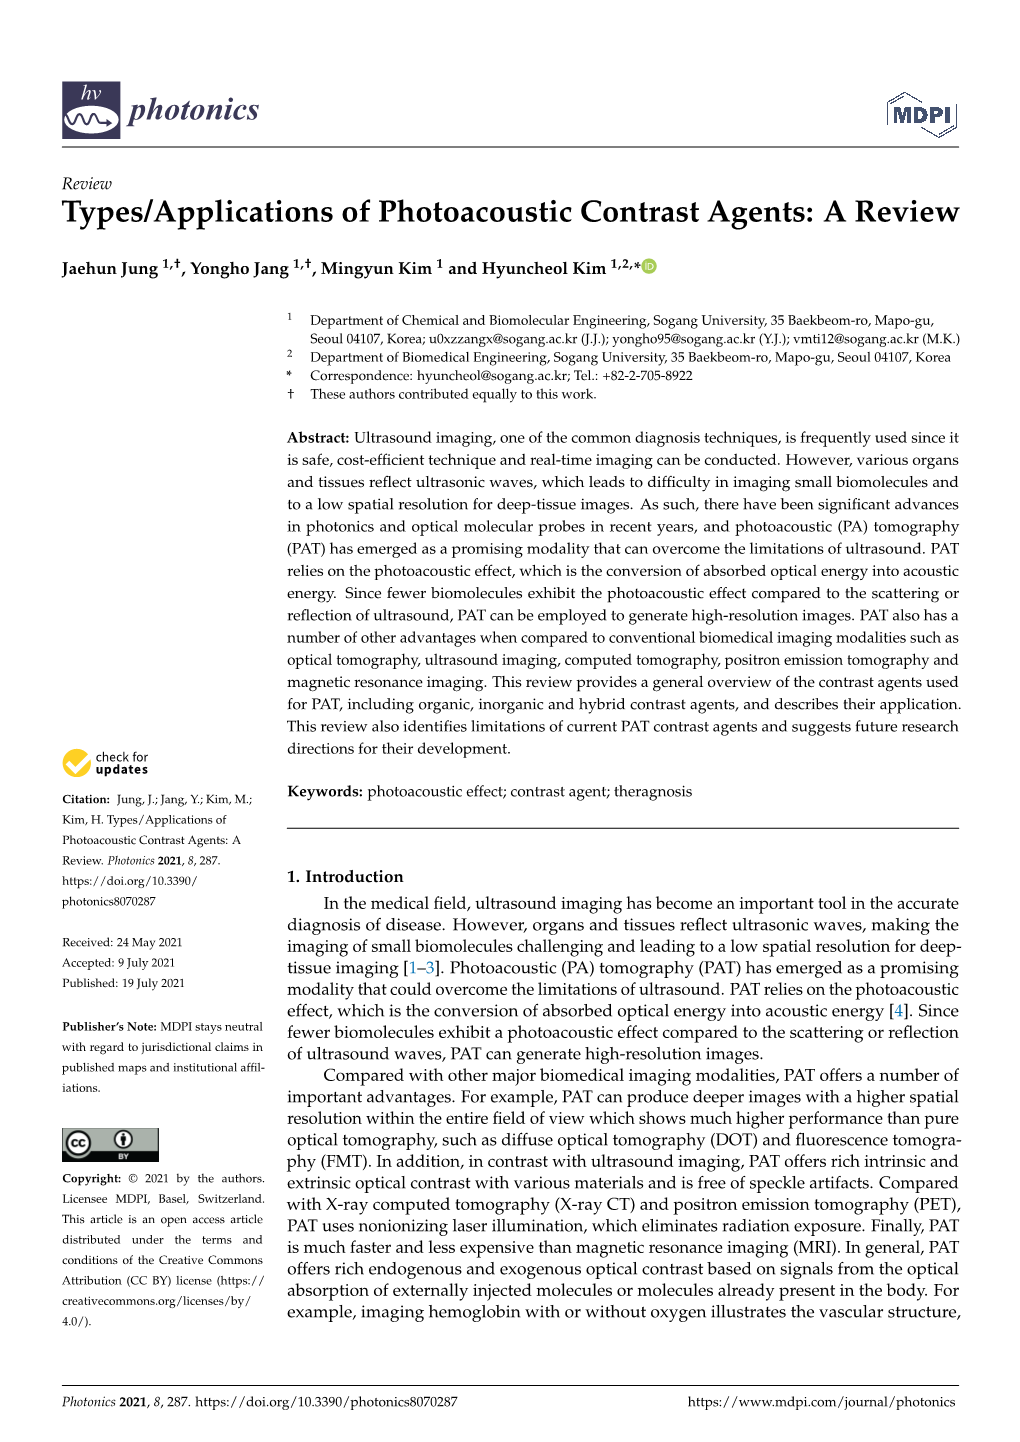 Types/Applications of Photoacoustic Contrast Agents: a Review